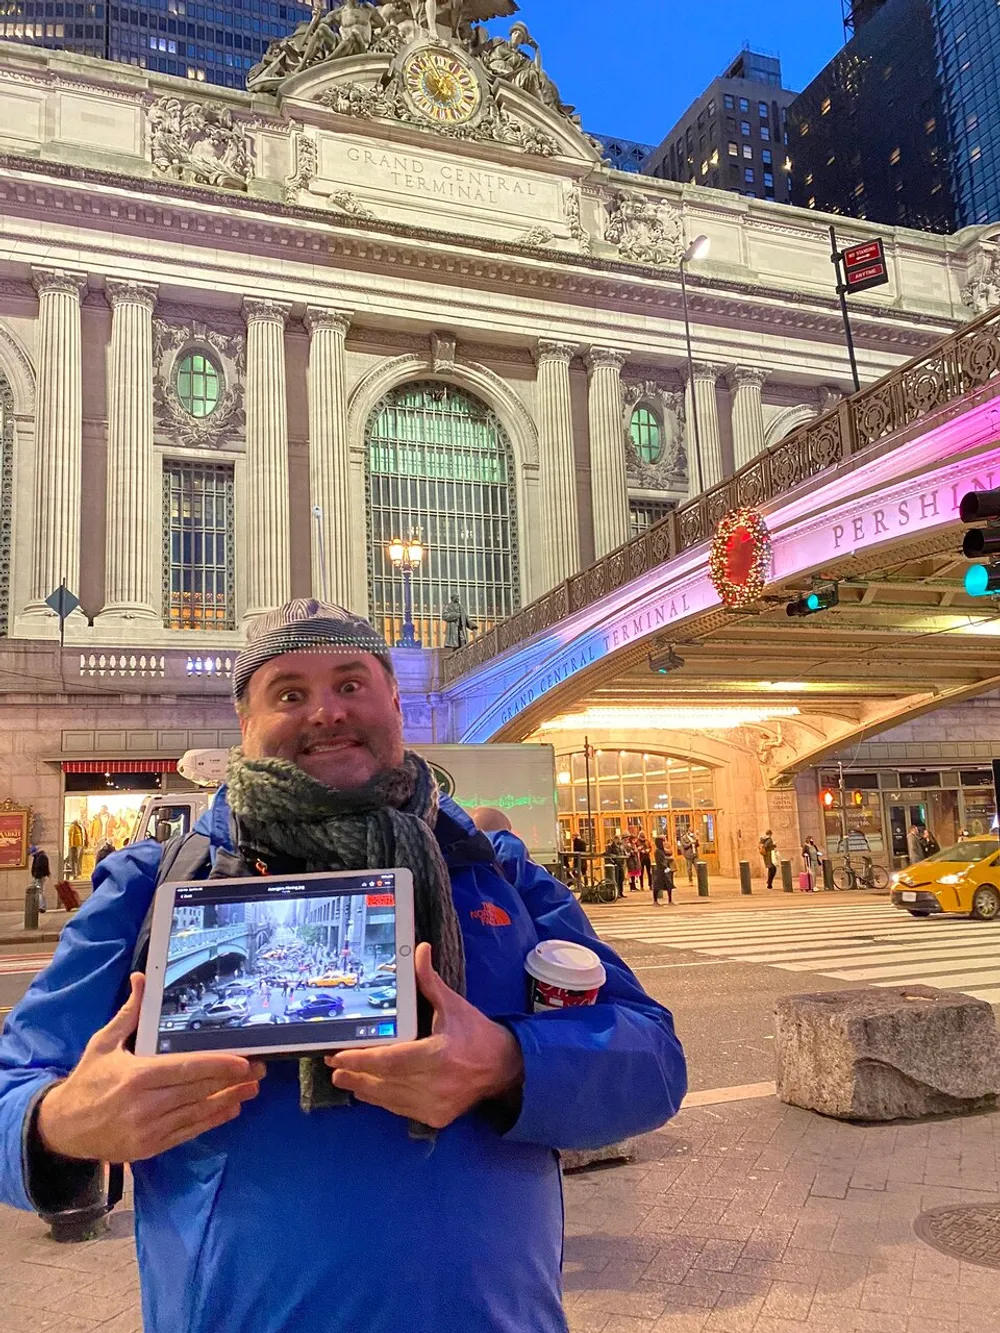 A person stands smiling in front of Grand Central Terminal at night holding a tablet that displays an image of a busy city street